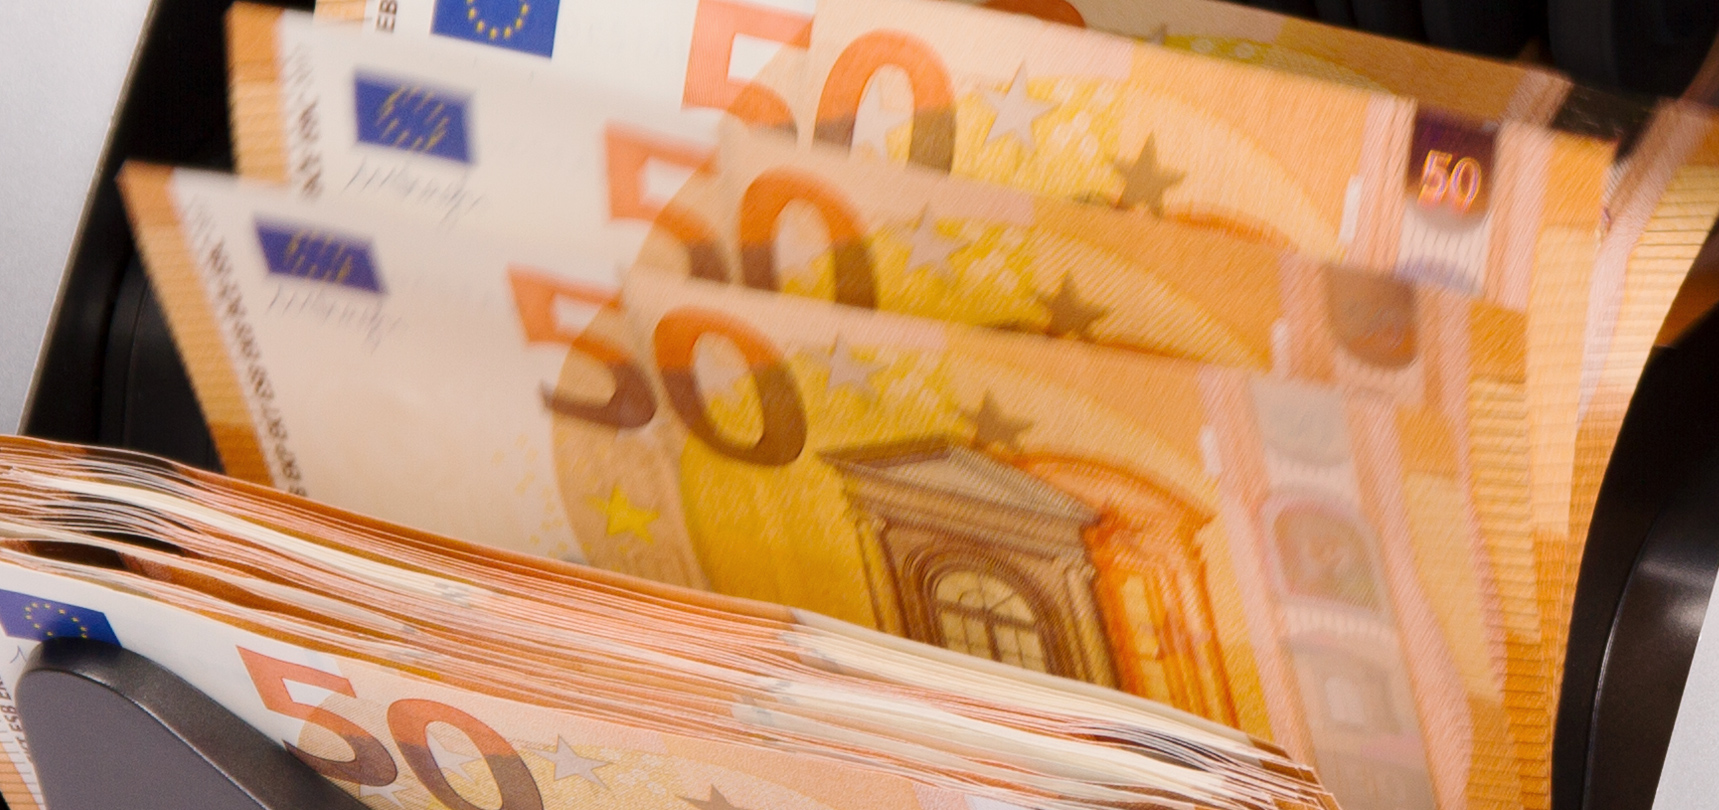 The new series of the euro banknotes